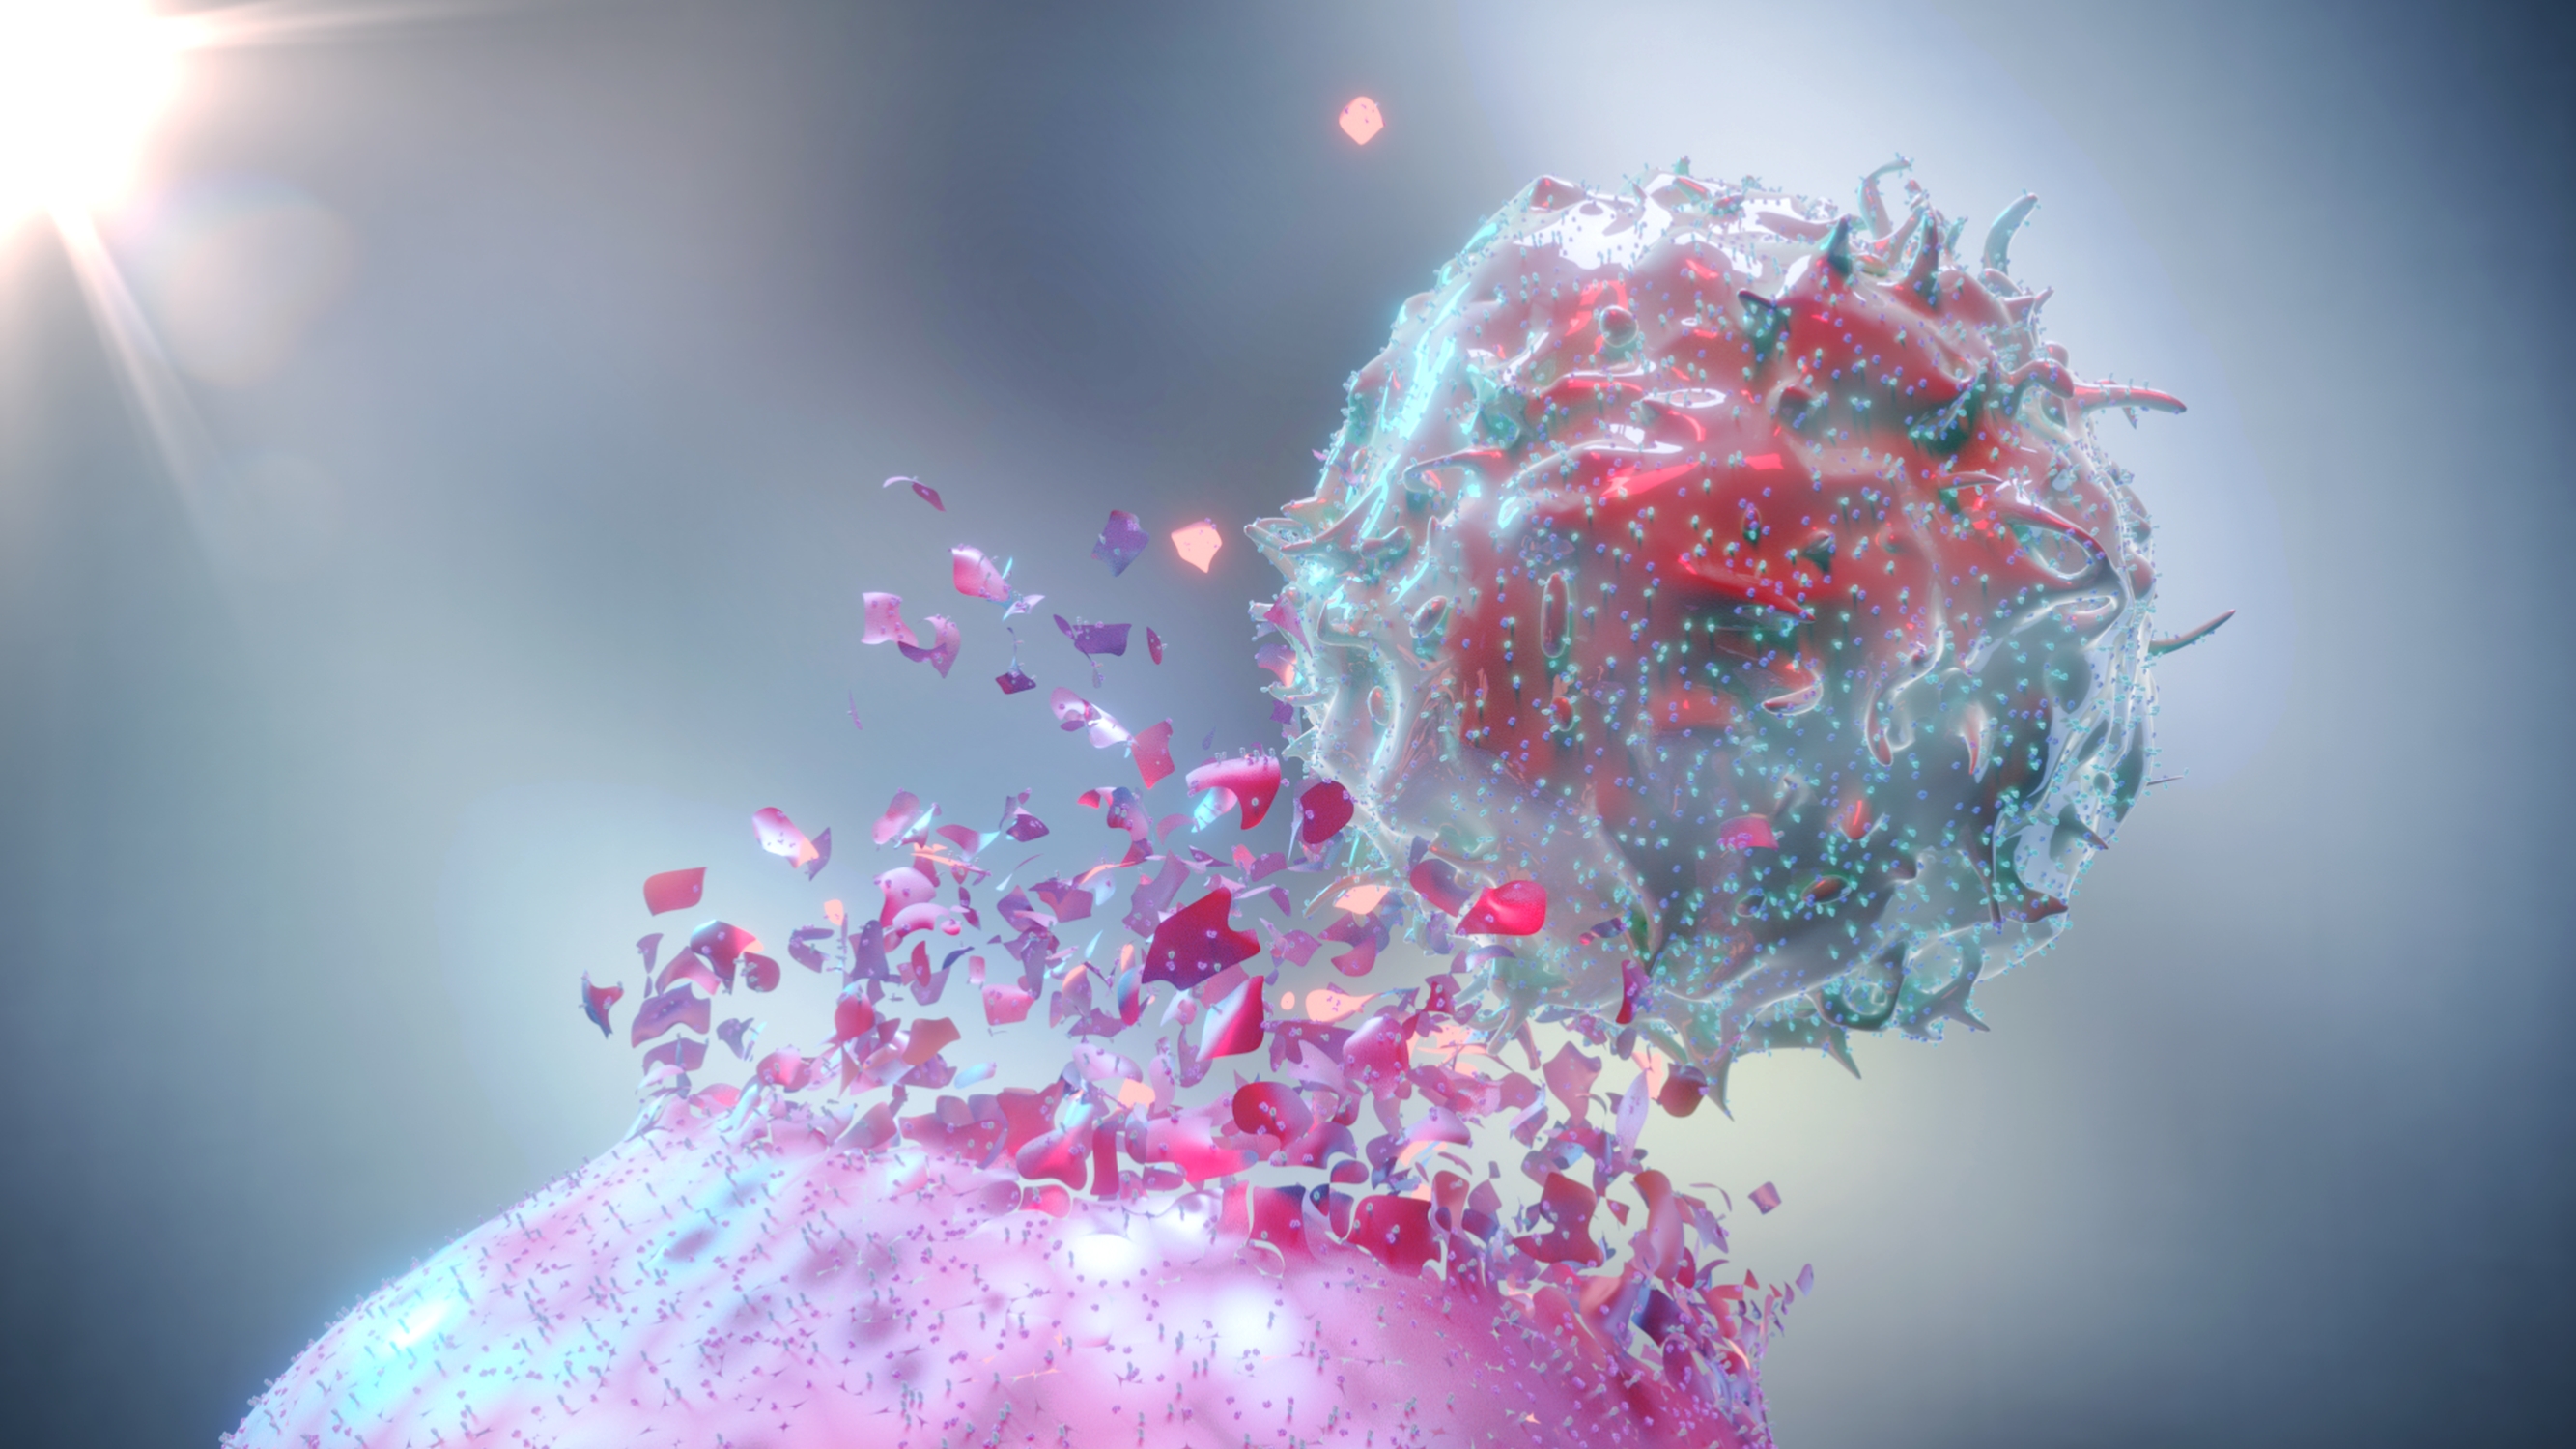 Natural Killer Cell (NK Cell) destroying a cancer cell - stock photo